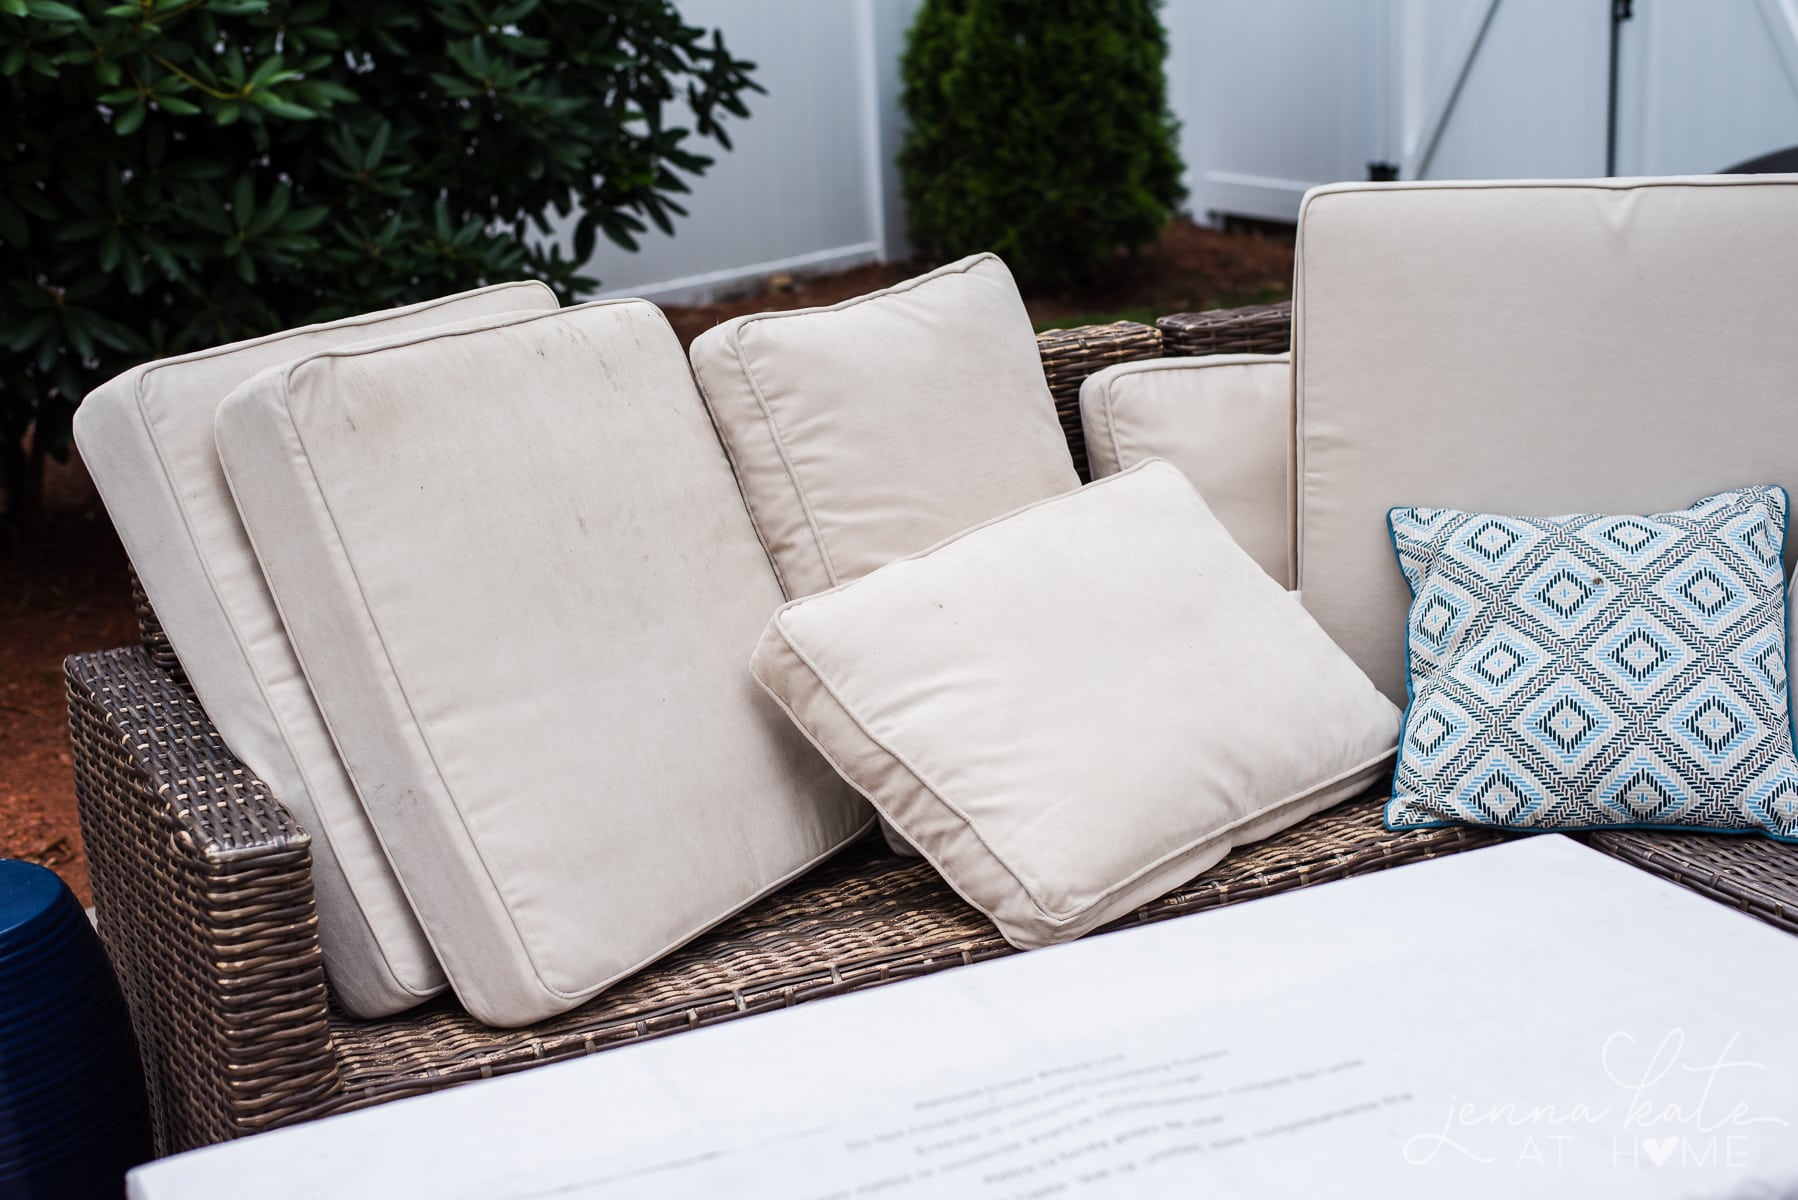 How To Clean Outdoor Cushions Jenna, How To Clean Outdoor Waterproof Cushions